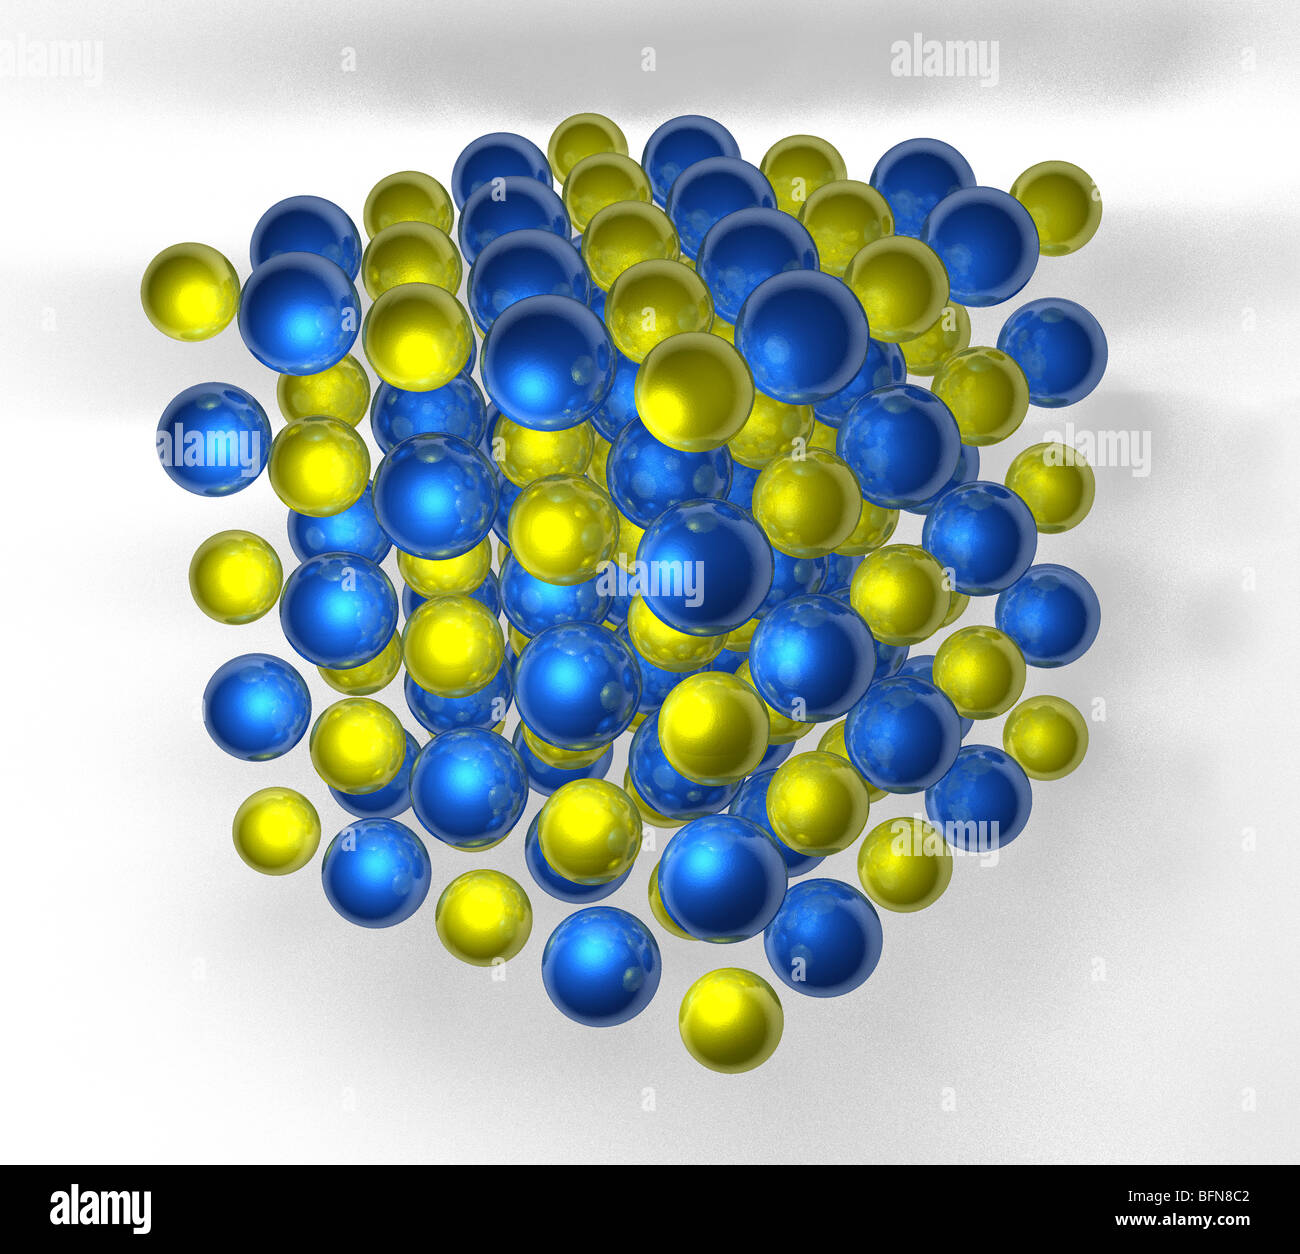 Computer graphic illustration of the crystal lattice structure of salt, sodium chloride. Stock Photo